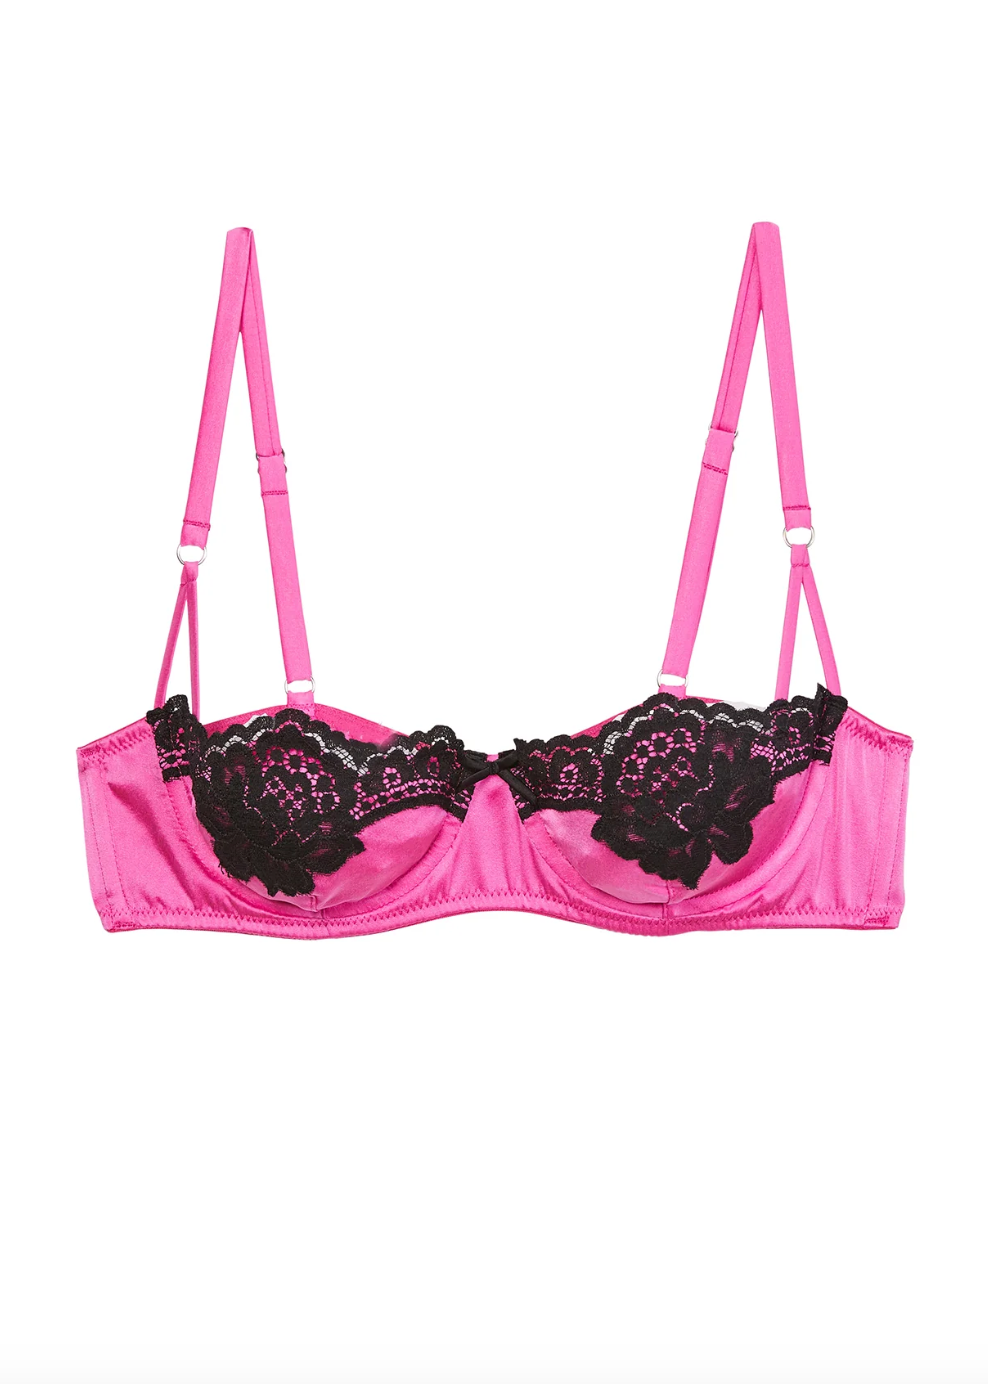 All About Eve Balconette Bra